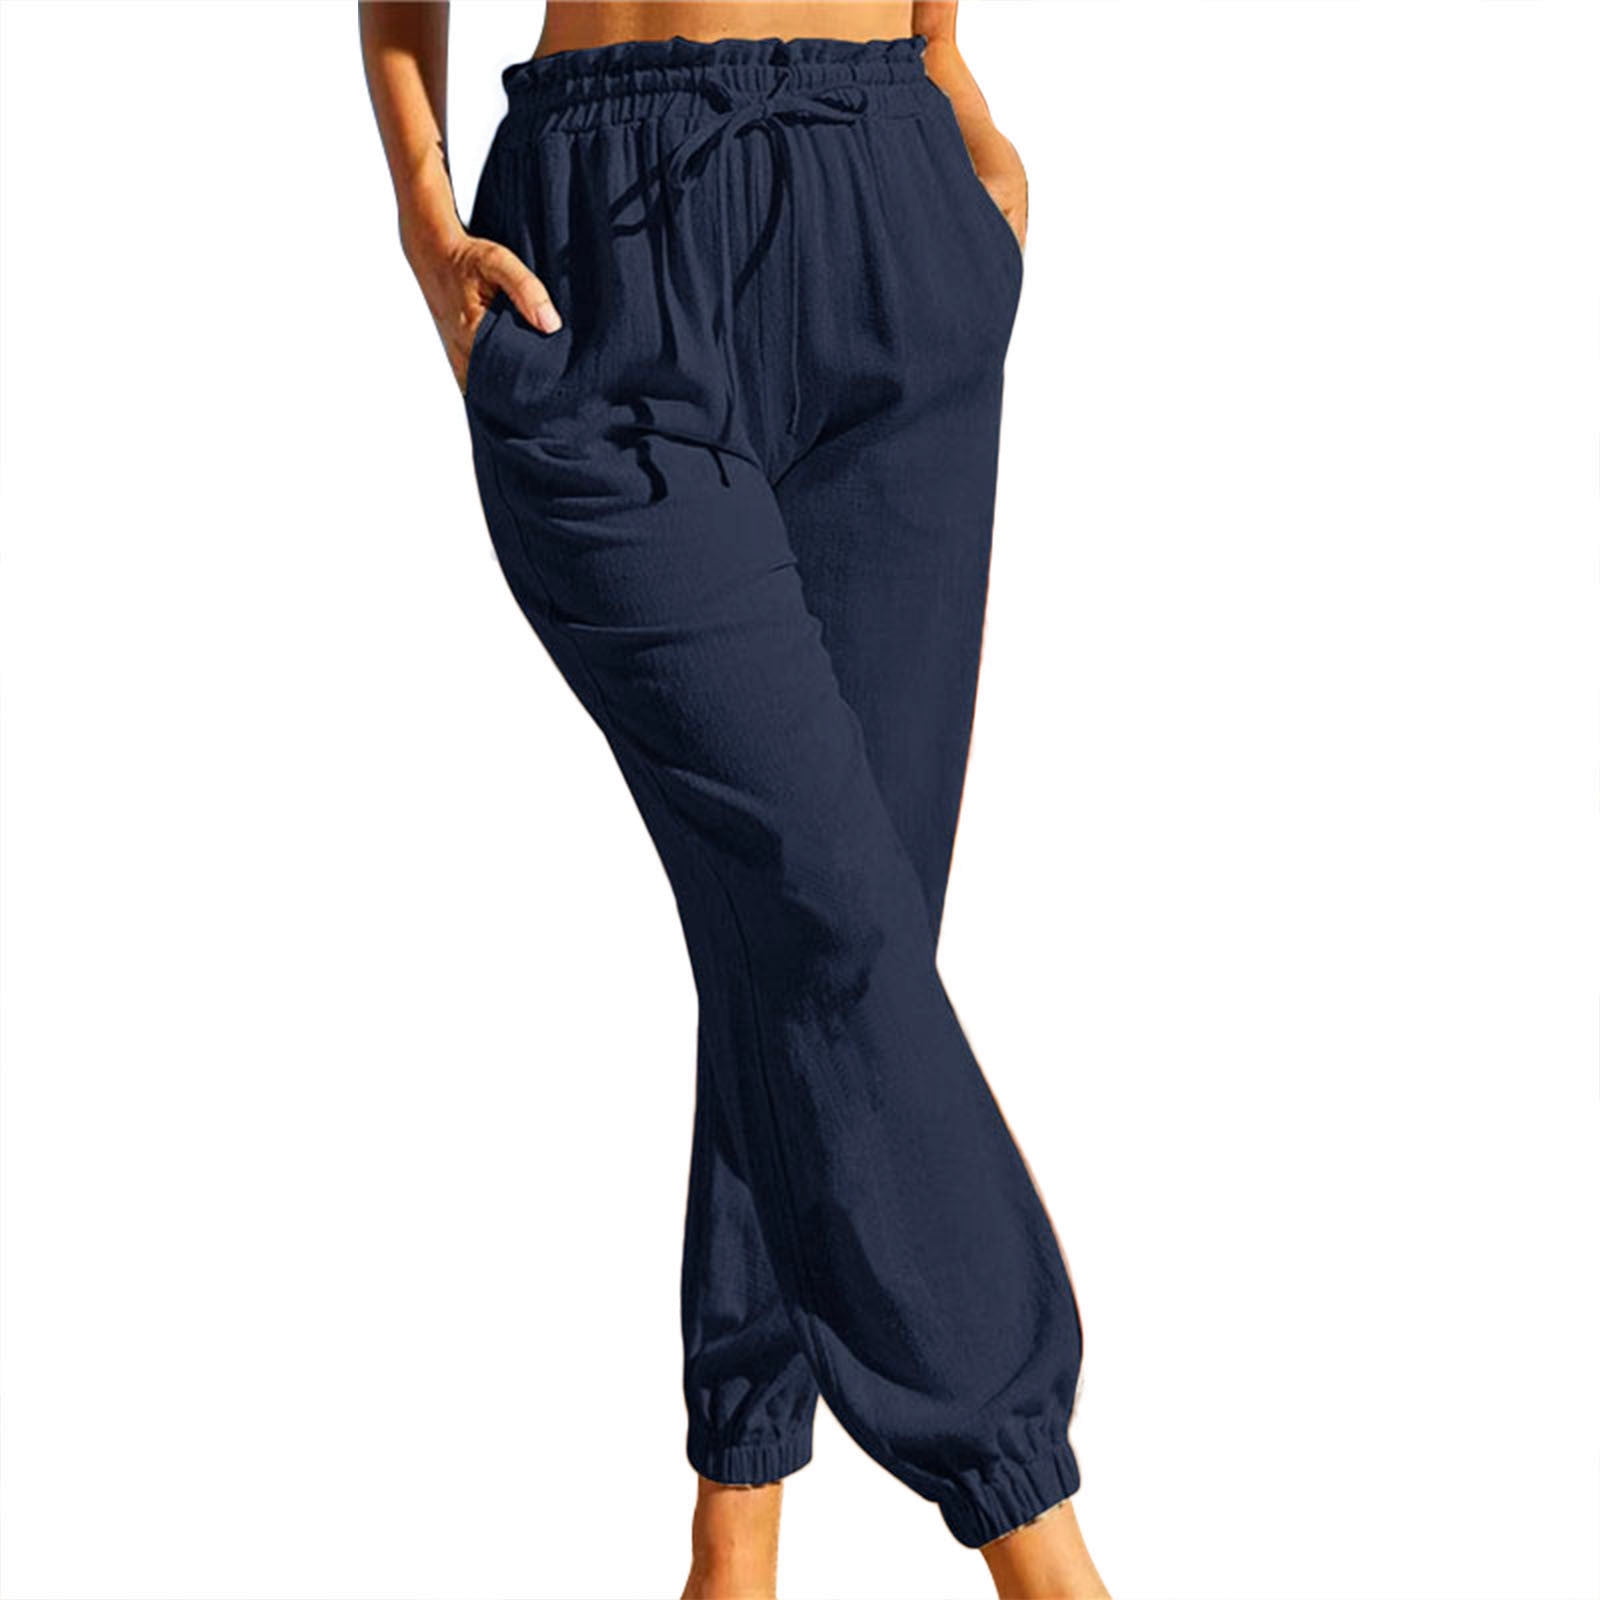 plus Size Business Casual Pants for Women 2x Womens Casual Elastic